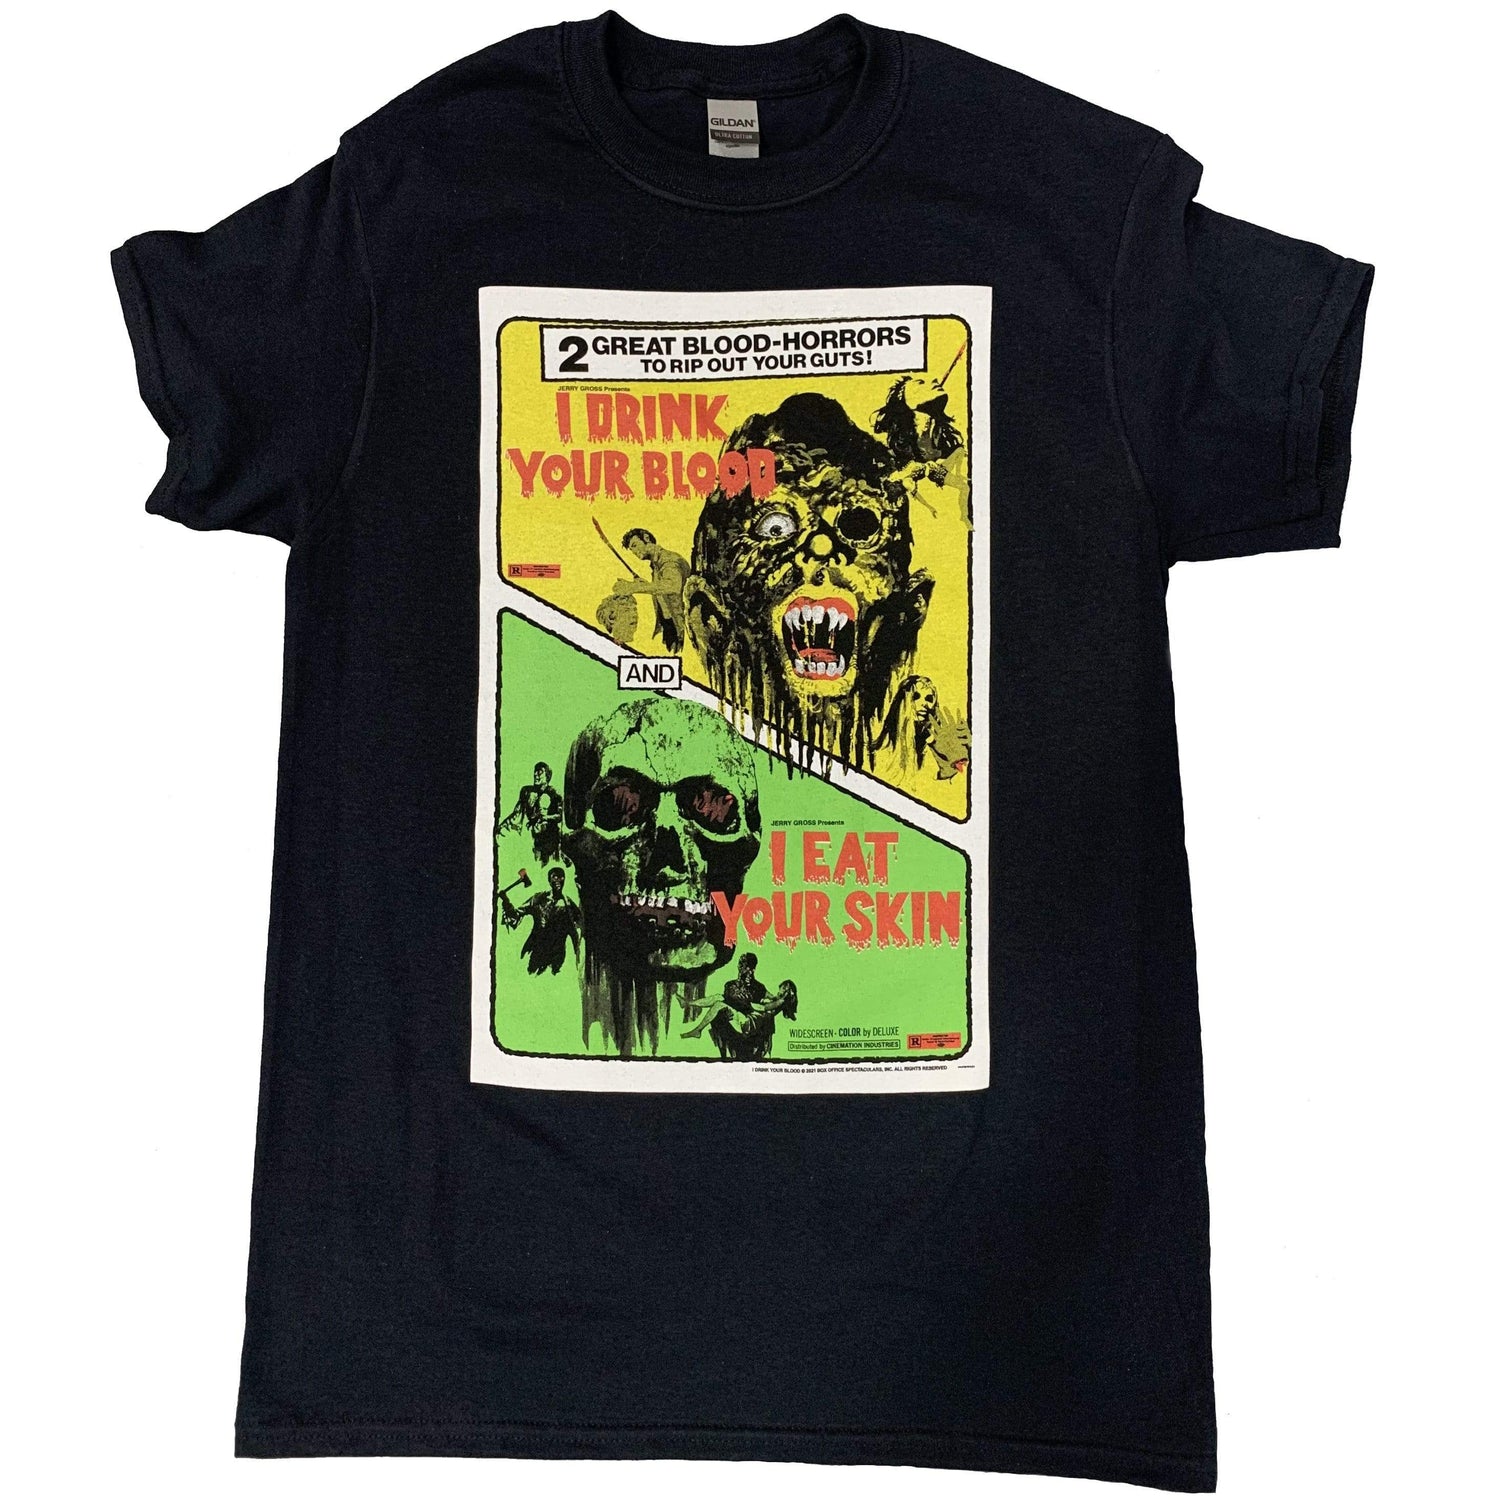 I DRINK YOUR BLOOD / I EAT YOUR SKIN T-shirt : Double feature one-sheet